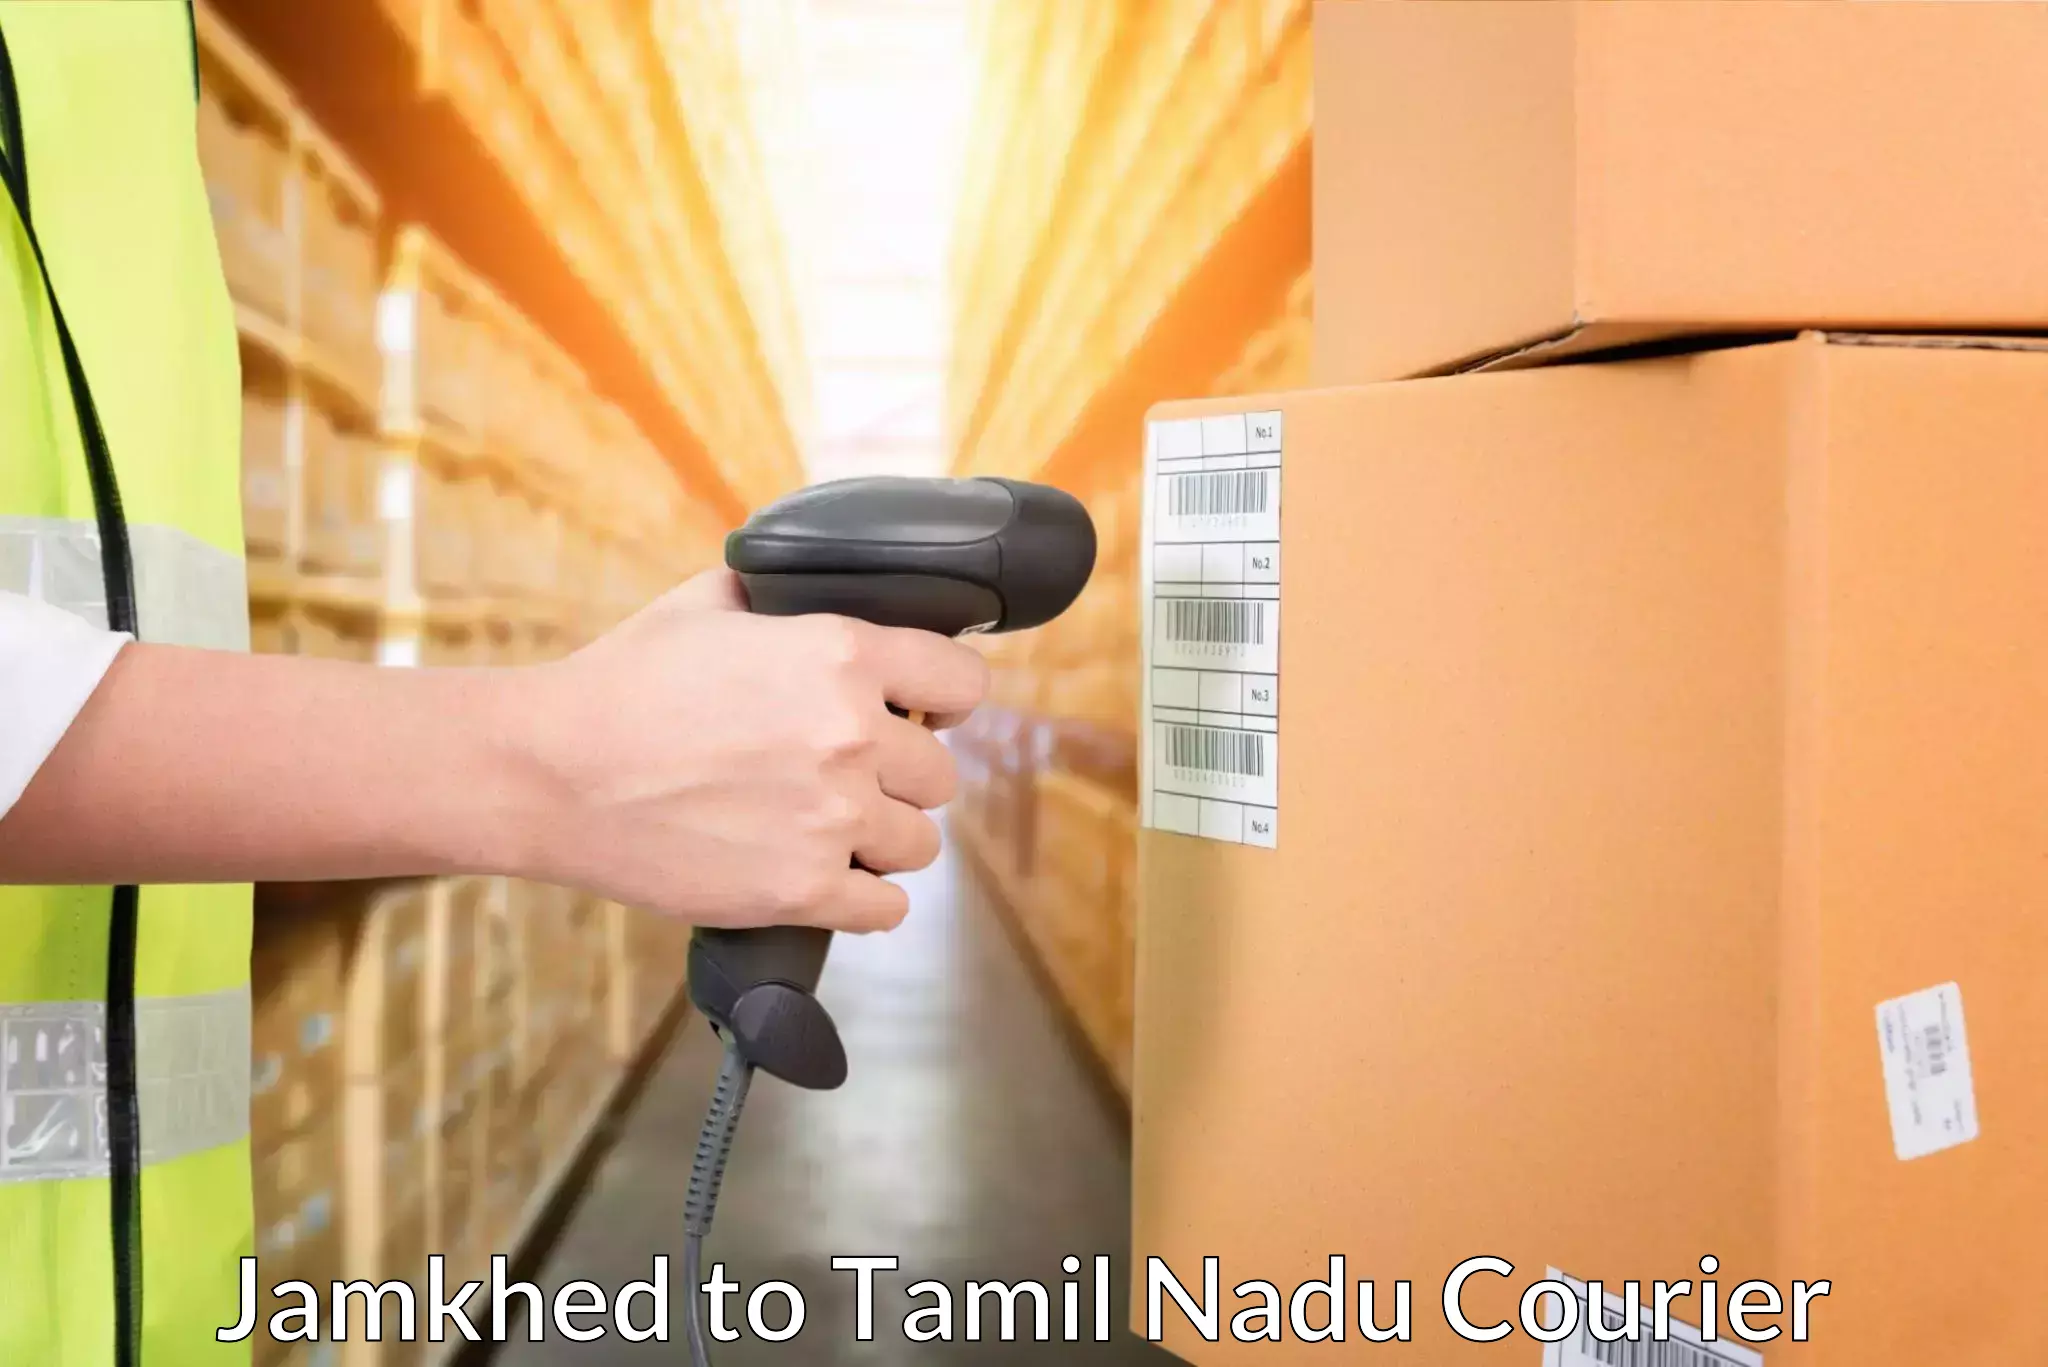 Subscription-based courier Jamkhed to Trichy